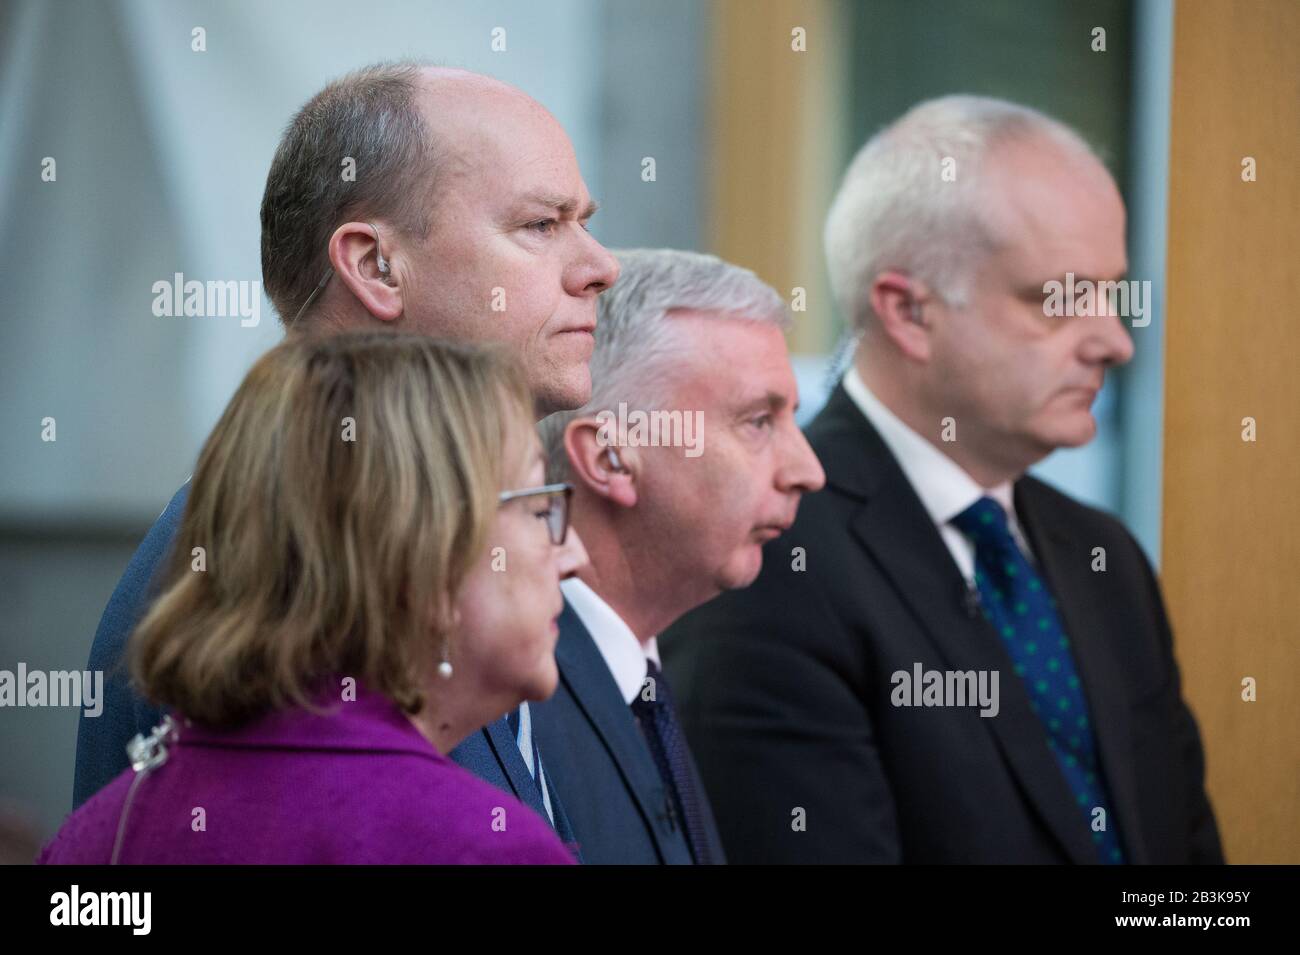 Edinburgh, UK. 4 March 2020.   Pictured: Annabelle Ewing MSP of the Scottish National Party (SNP); Gordon Lindhurst MSP - Shadow Minister for Business, Infrastructure and Transport, Scottish Conservative and Unionist Party; James Kelly MSP - Shadow Cabinet Secretary for Justice, Member for Glasgow, Scottish Labour Party; Mark Ruskell MSP - Spokesperson for Climate, Energy, Environment, Food & Farming.   Members of the various political parties being interviewed live on BBC TV.  Scenes inside the debating chamber of the Scottish Parliament. Stock Photo